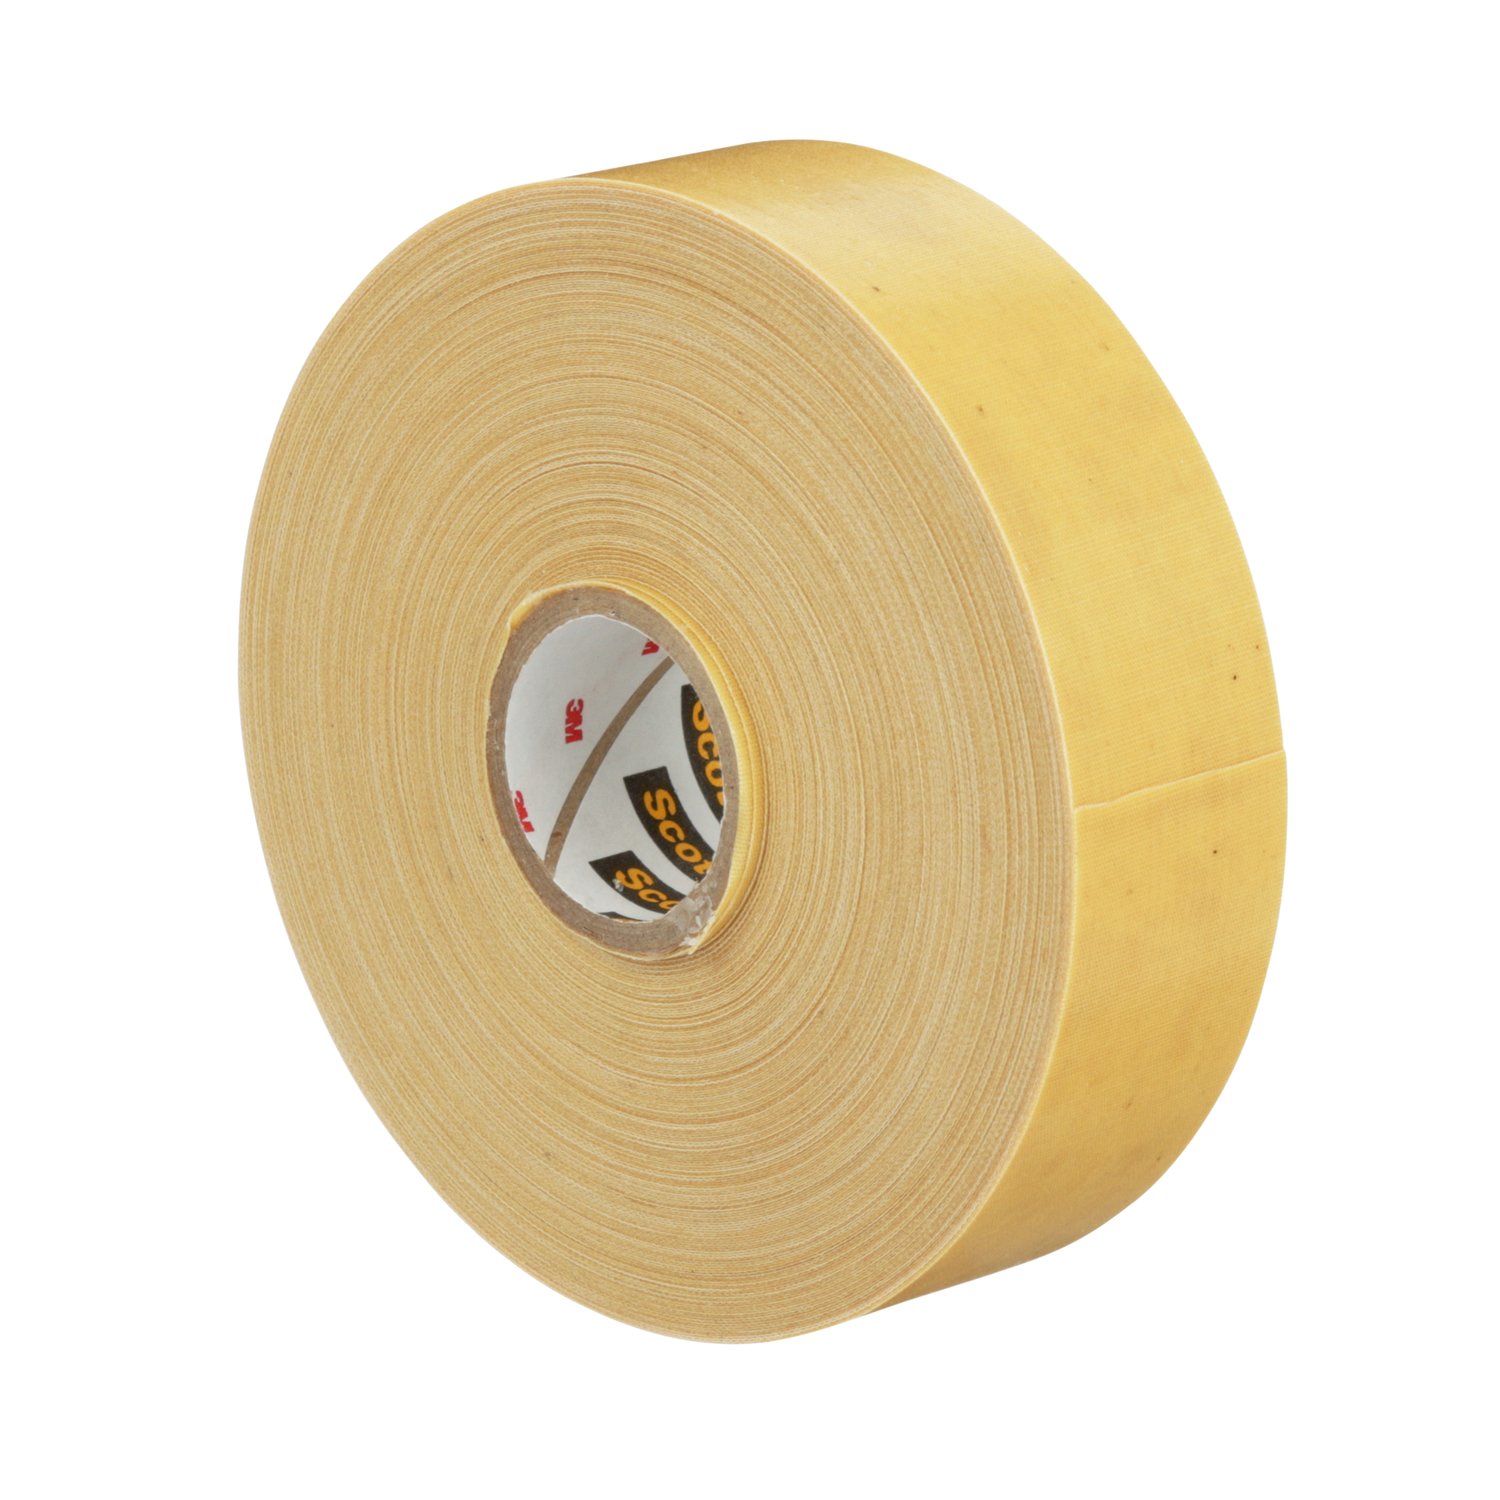 7000132813 - Scotch Varnished Cambric Tape 2520, 1 in x 36 yd, Yellow, 36 rolls/Case